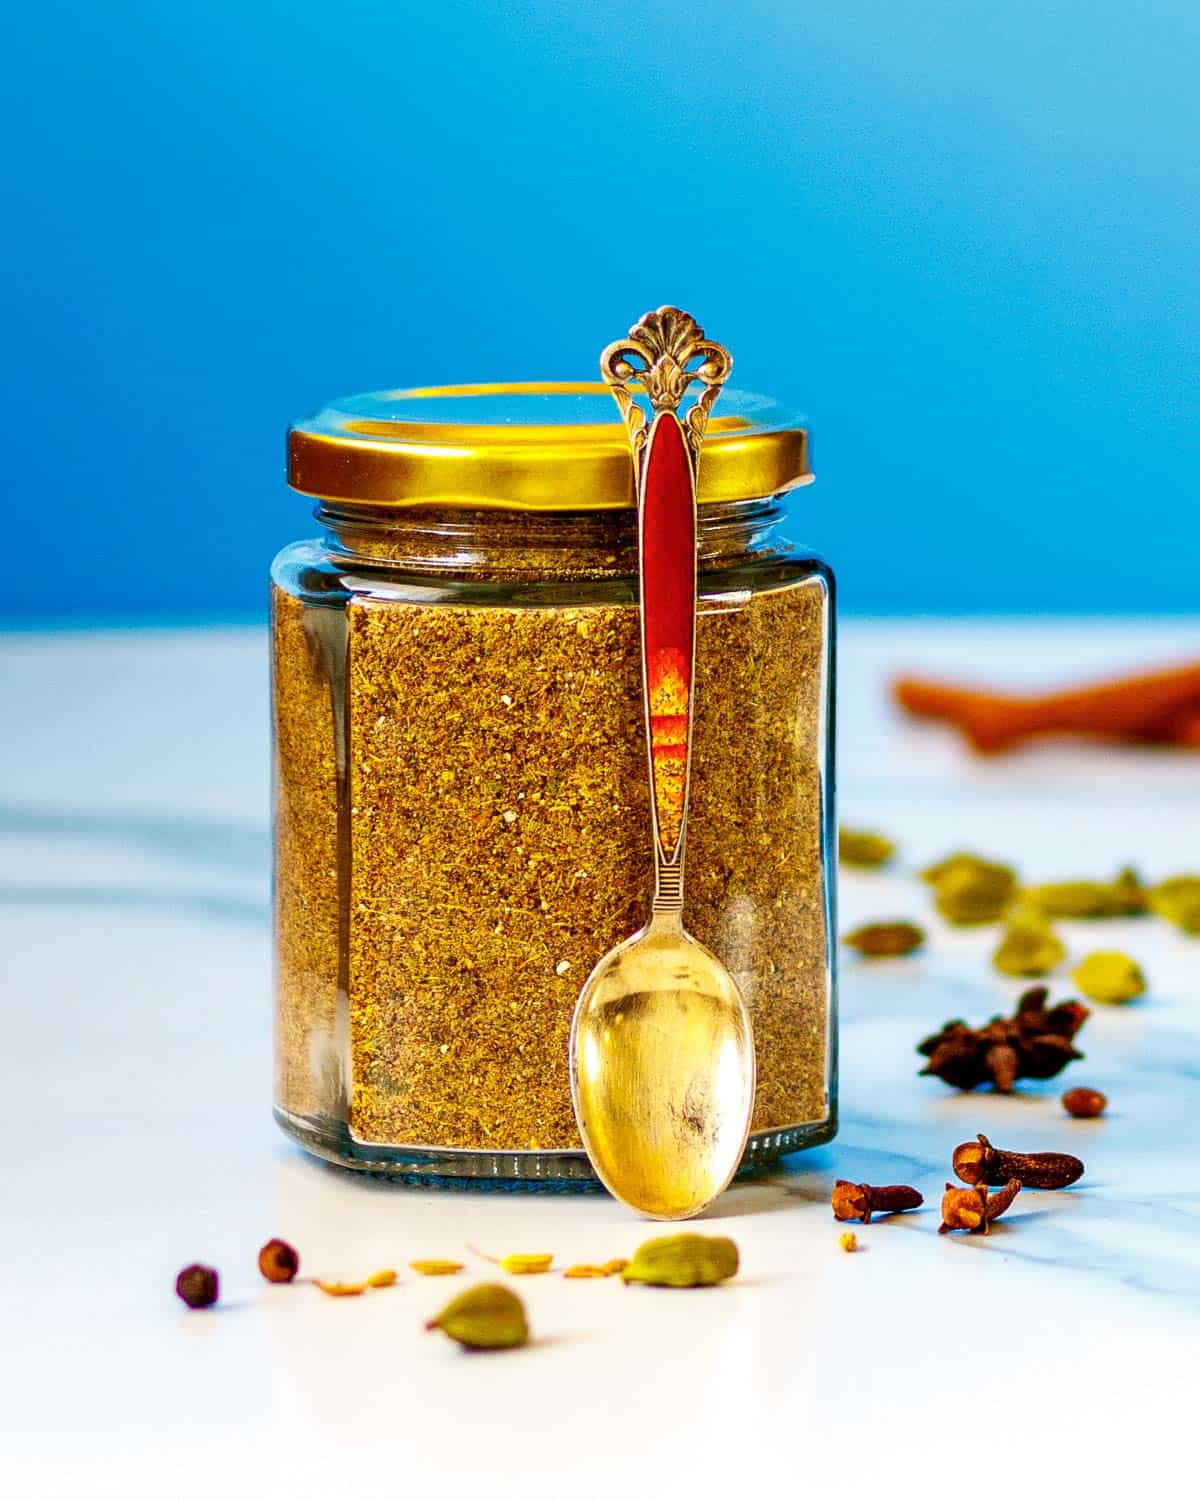 Jar of ground Indian spices for tea.